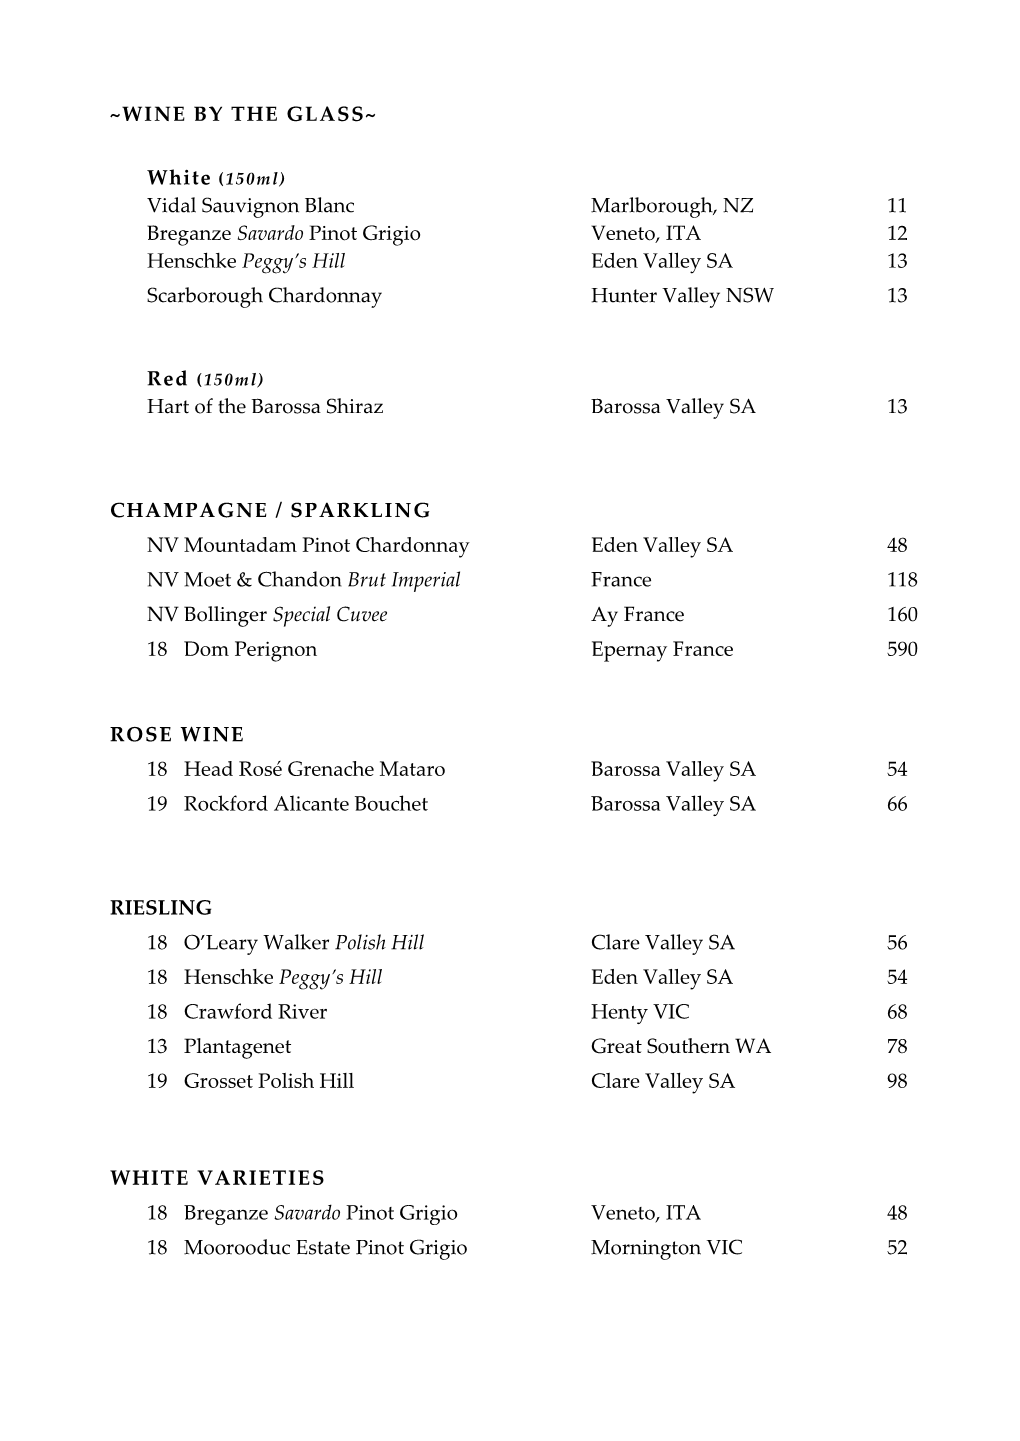 Wines by the Glass